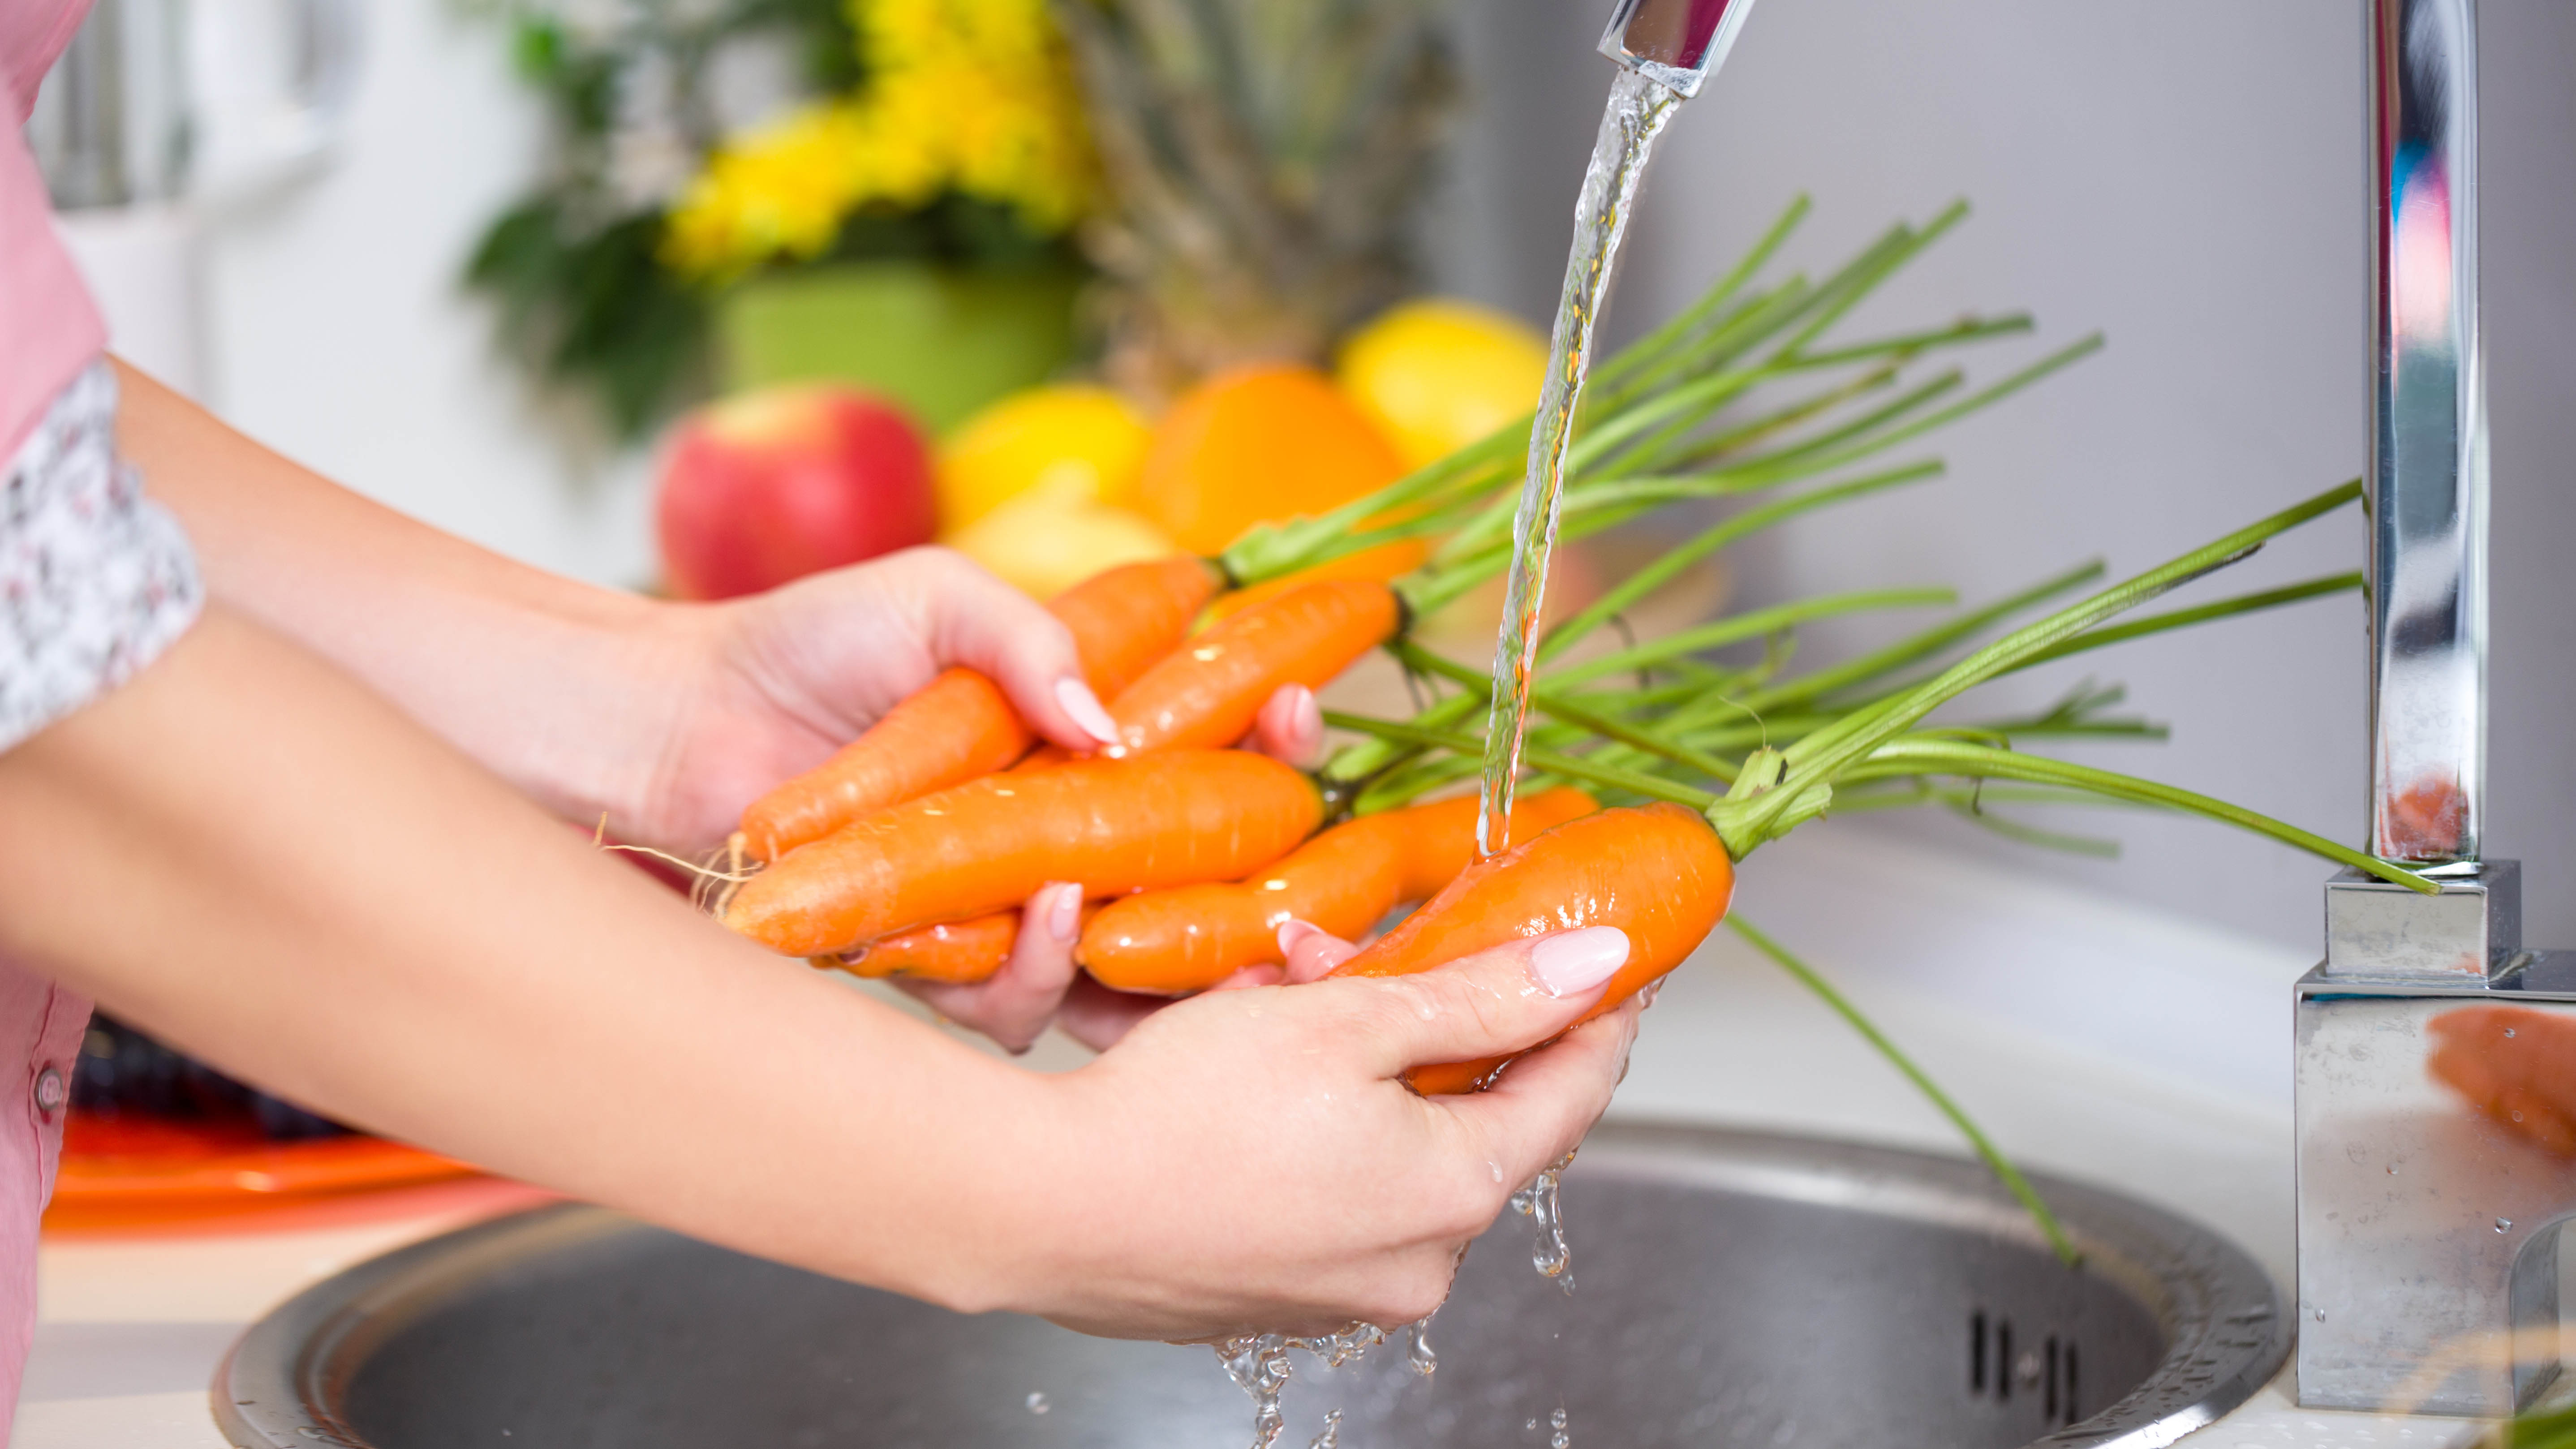 Carrots being washed at a sink